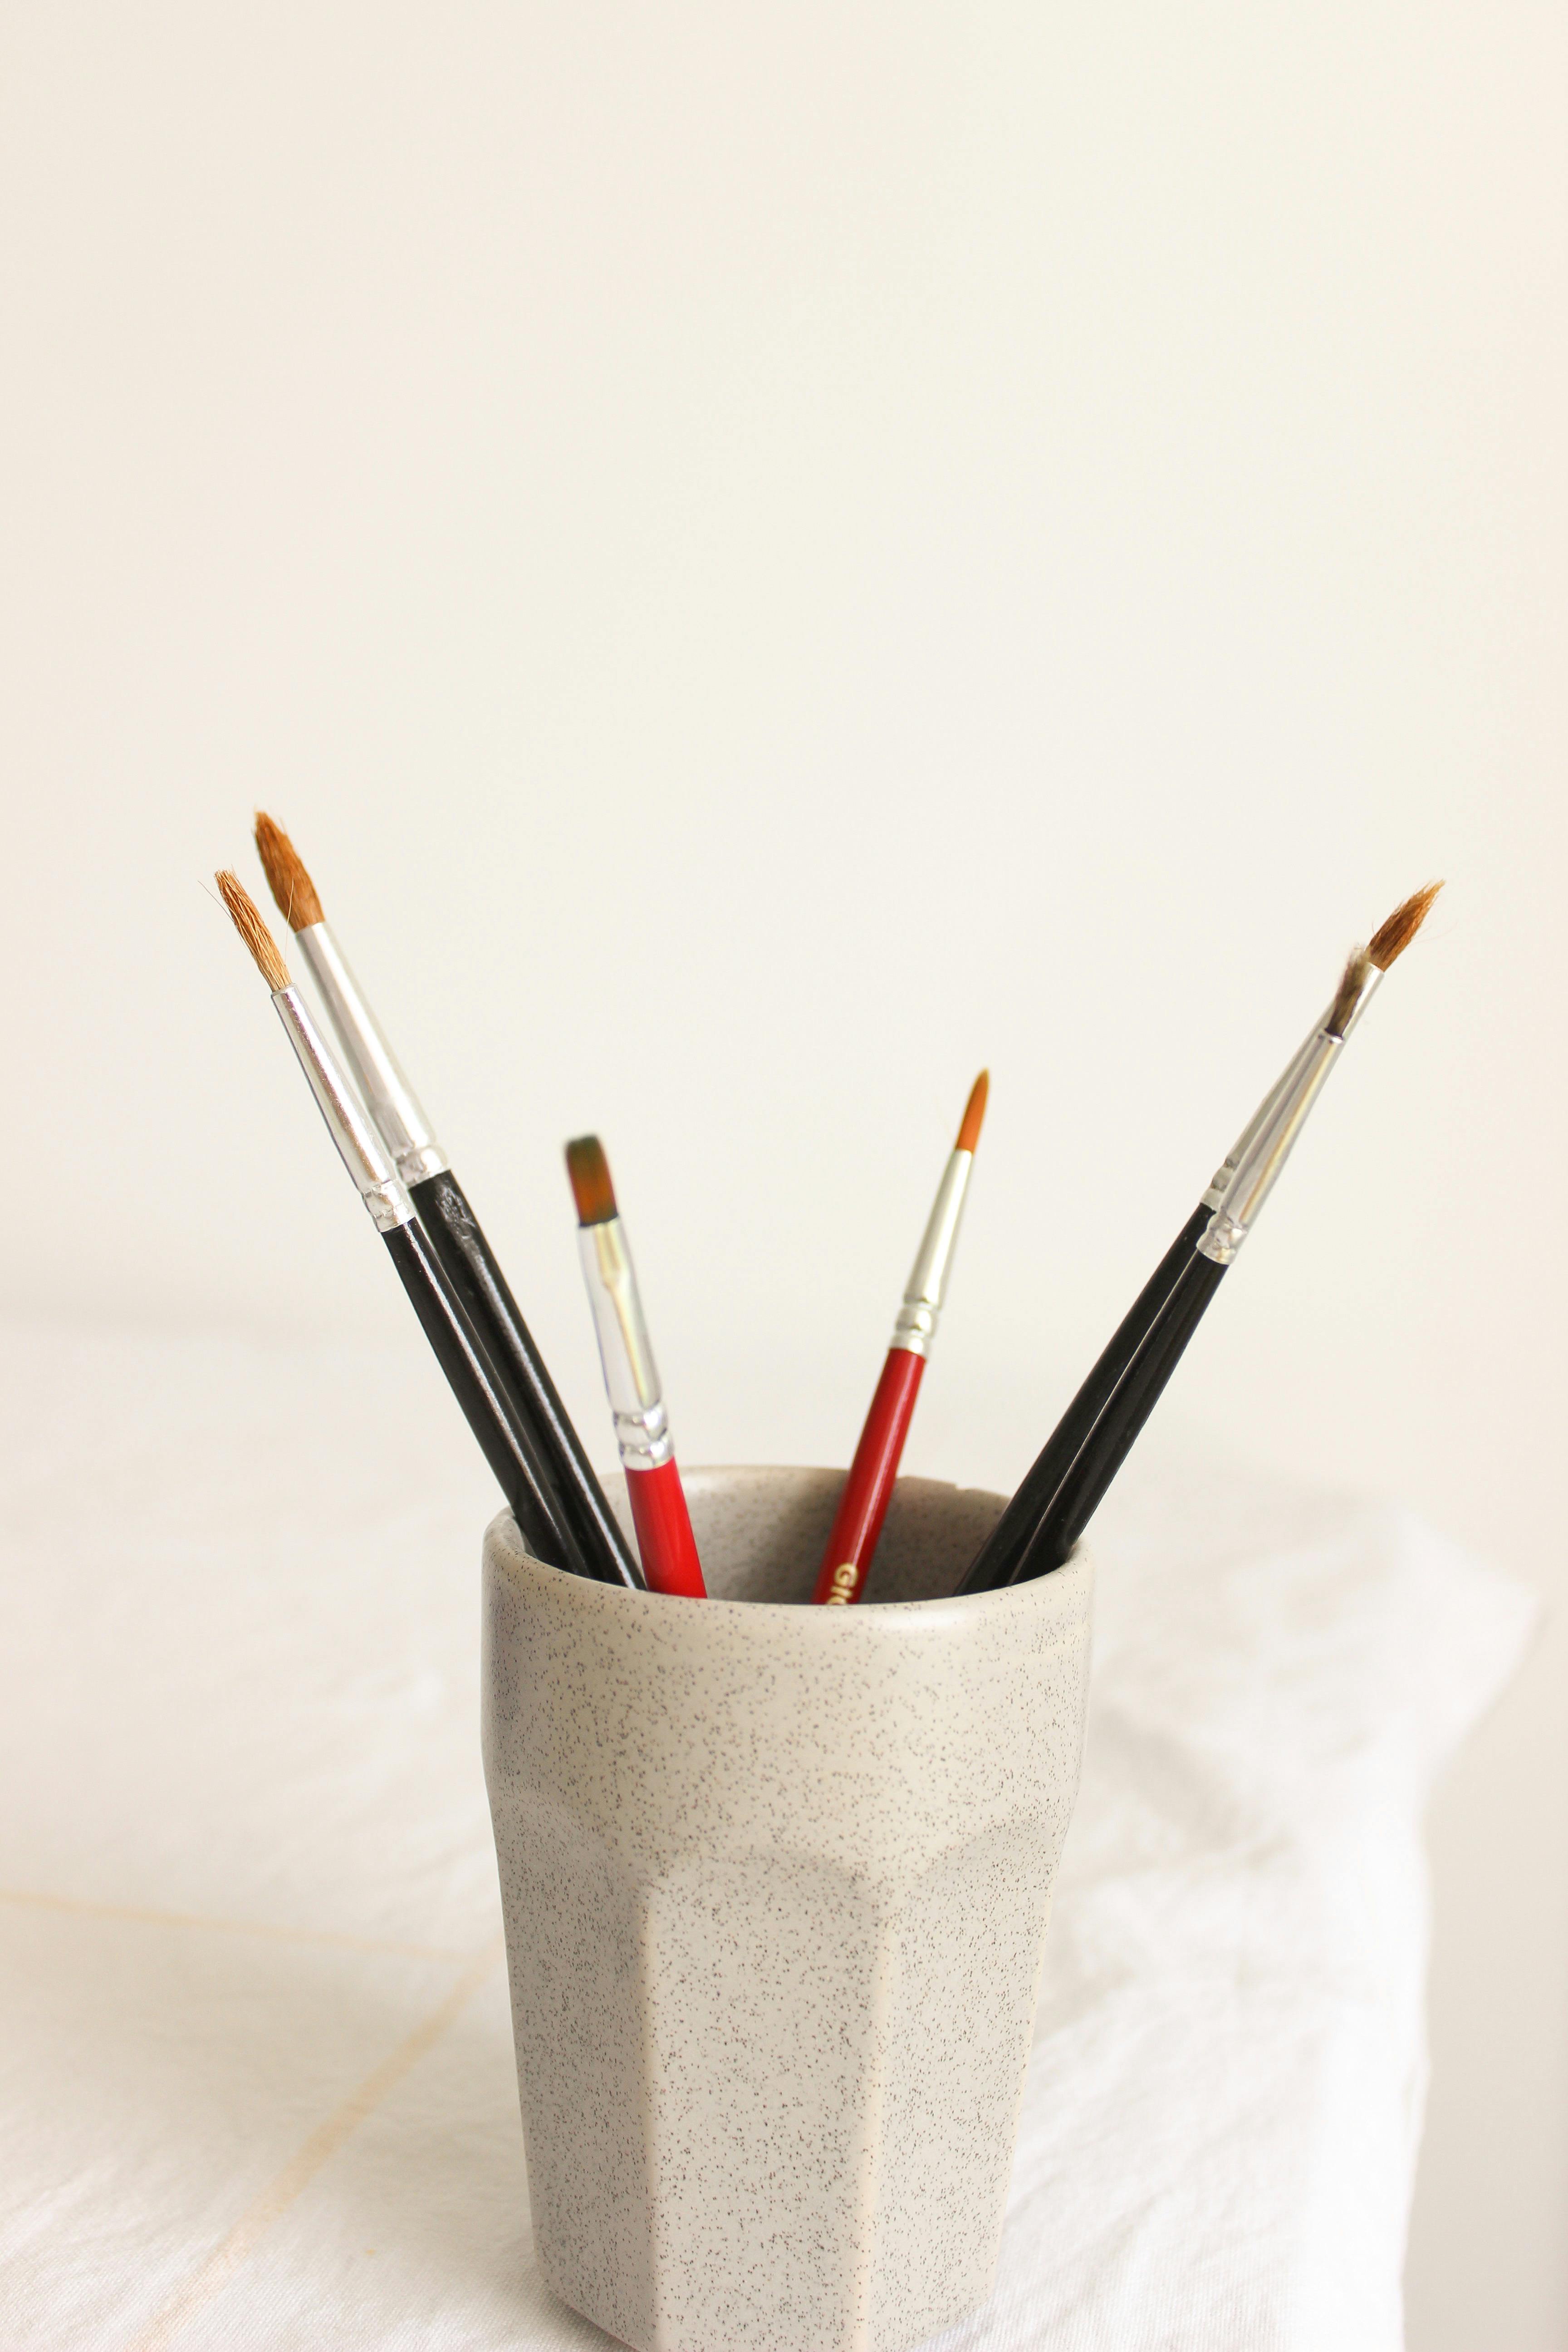 Steel Mesh Brush Pot And Pencils Stock Photo, Picture and Royalty Free  Image. Image 13253038.